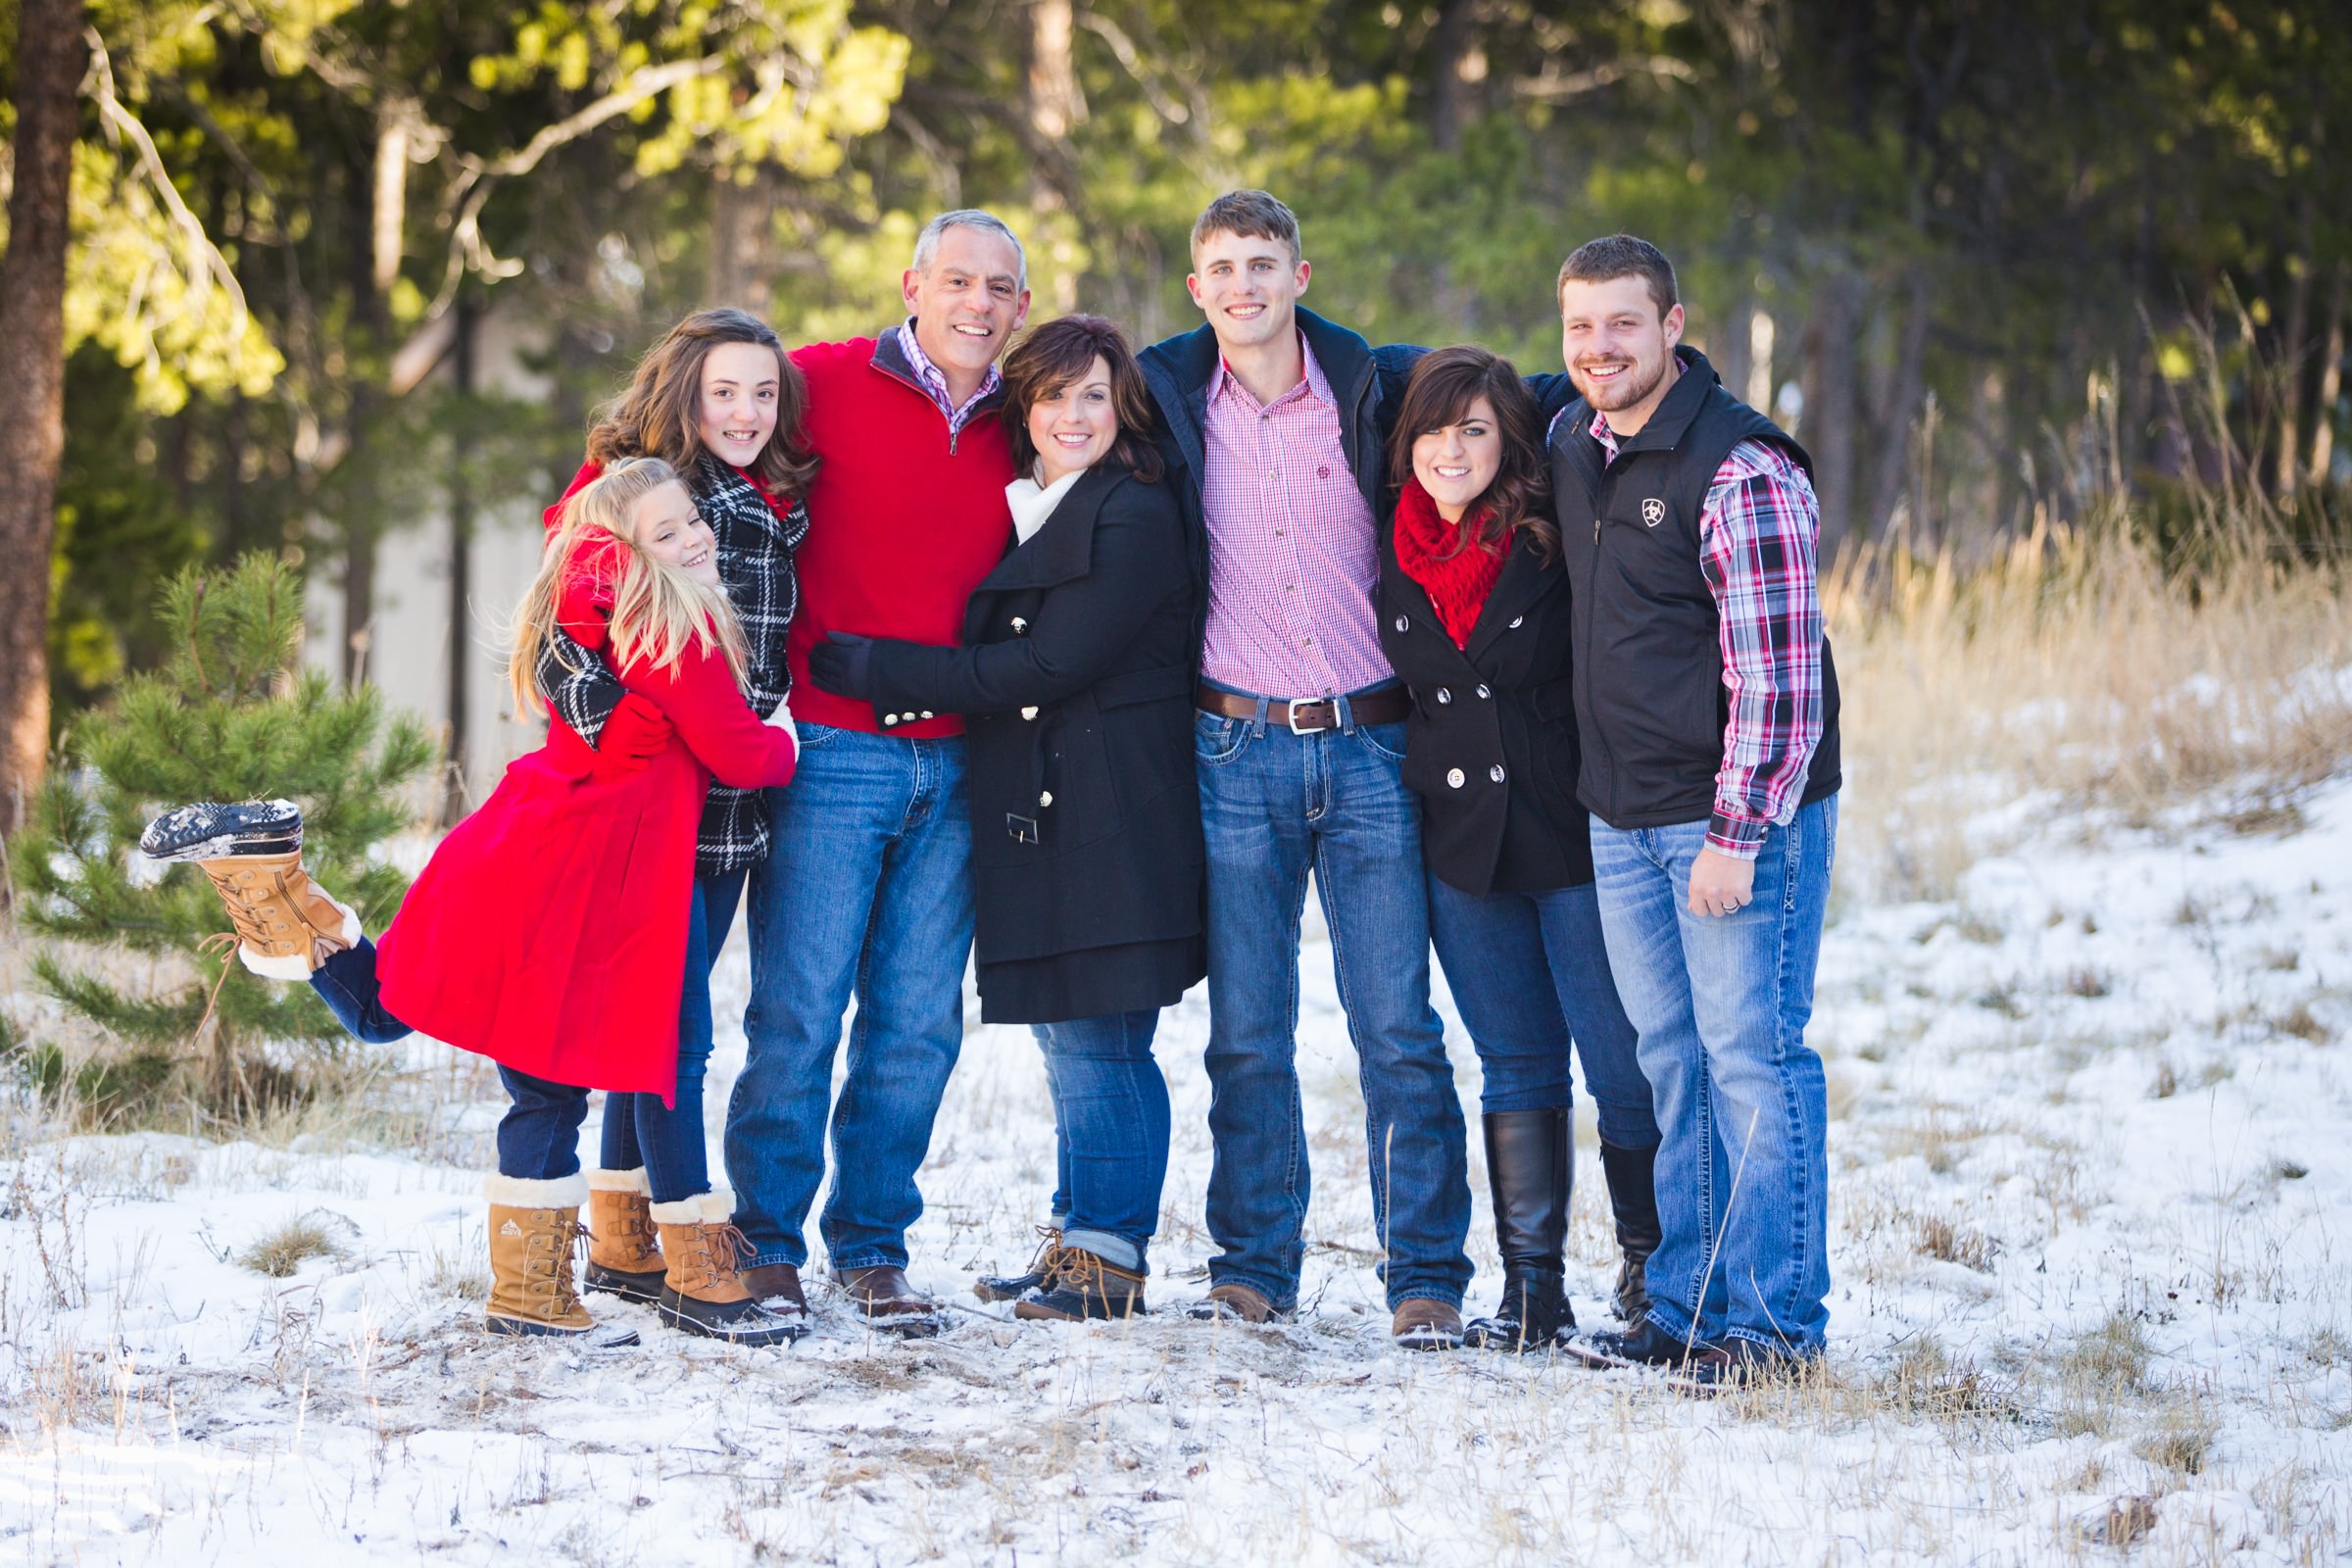 a good-looking family poses in a snowy yard